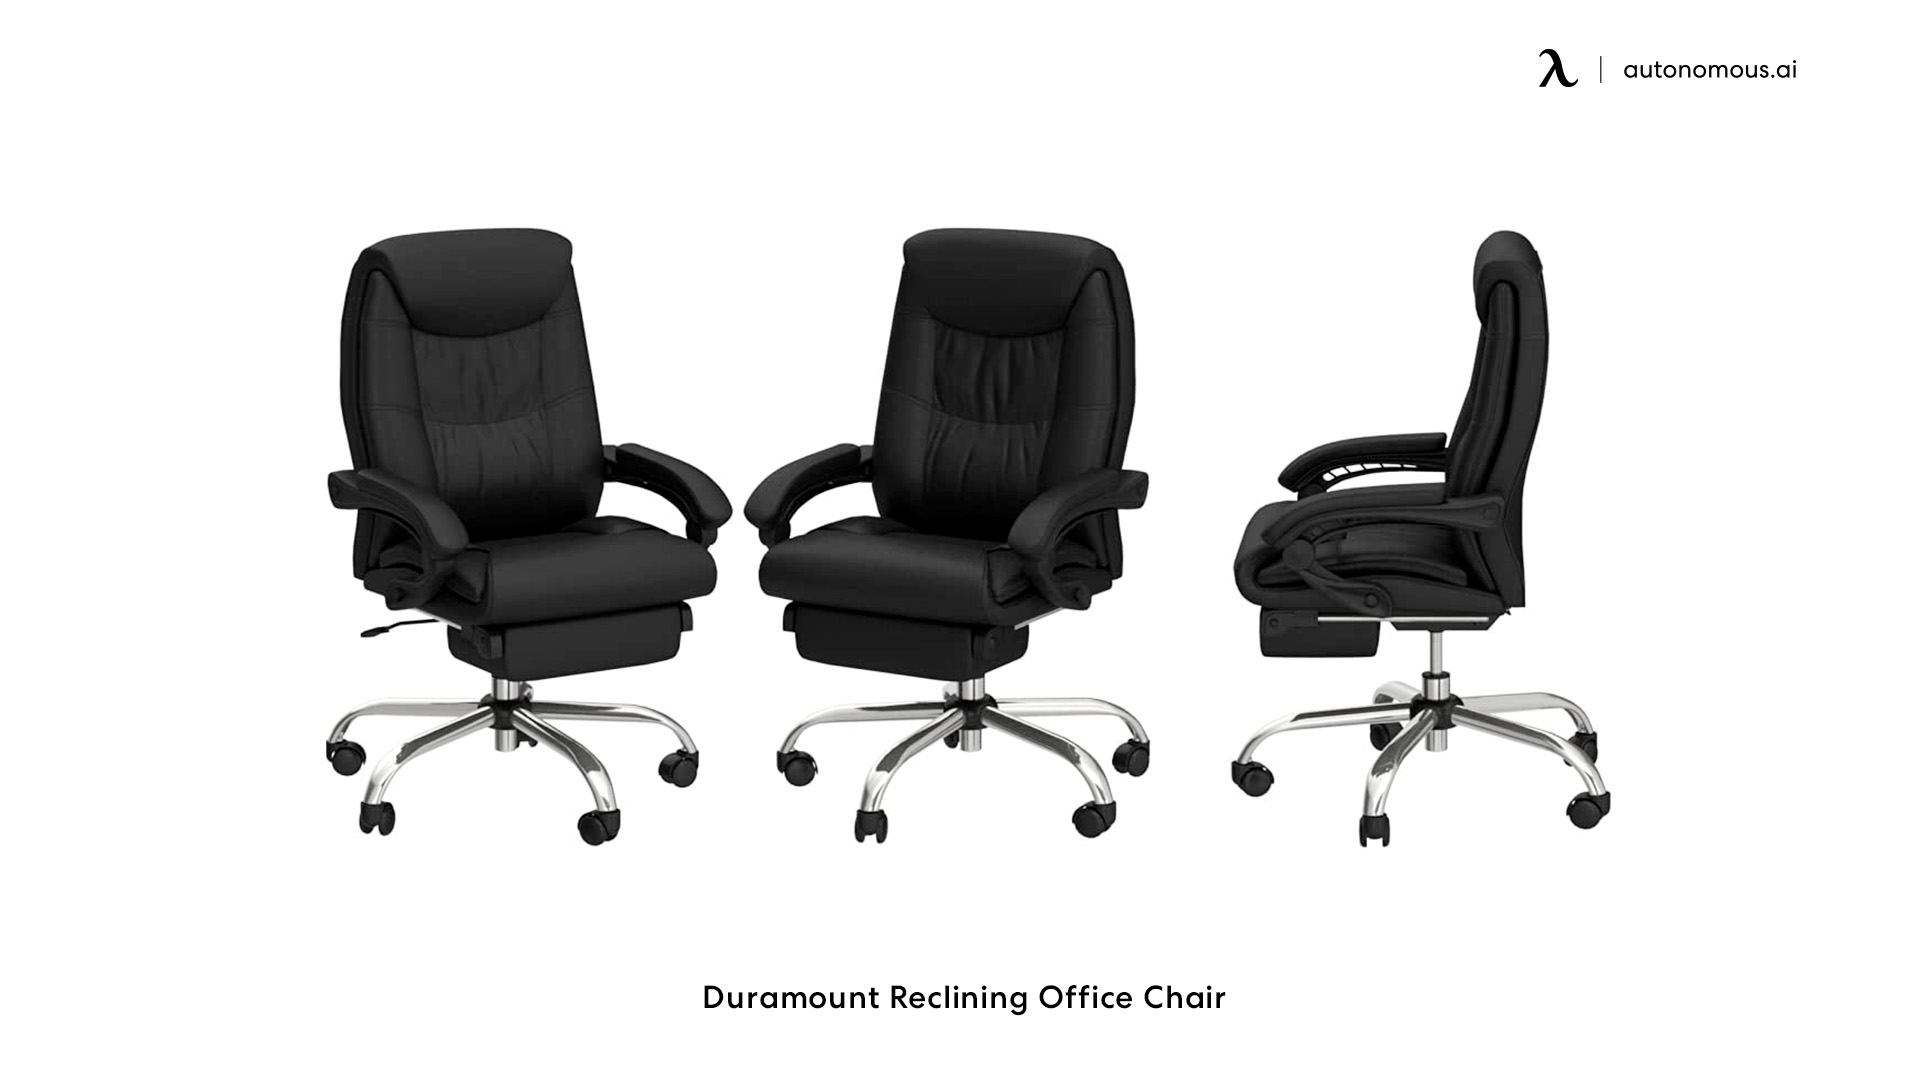 Duramount Reclining Office rolling chair